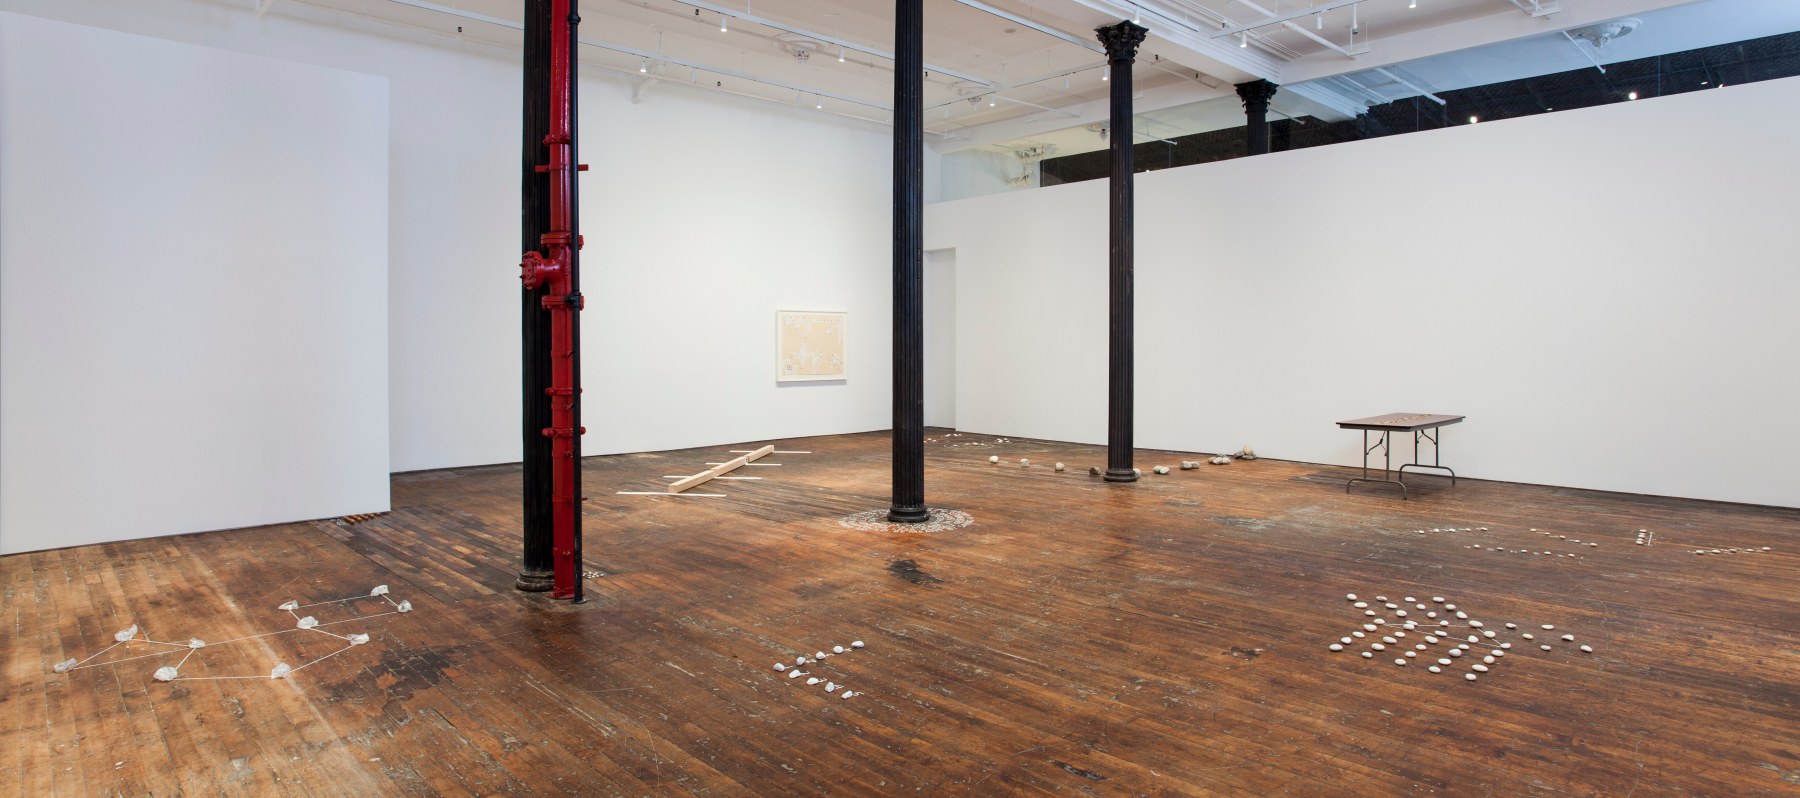 Mel Bochner, Proposition and Process: A Theory of Sculpture (1968 - 1973) &ndash; installation view 1